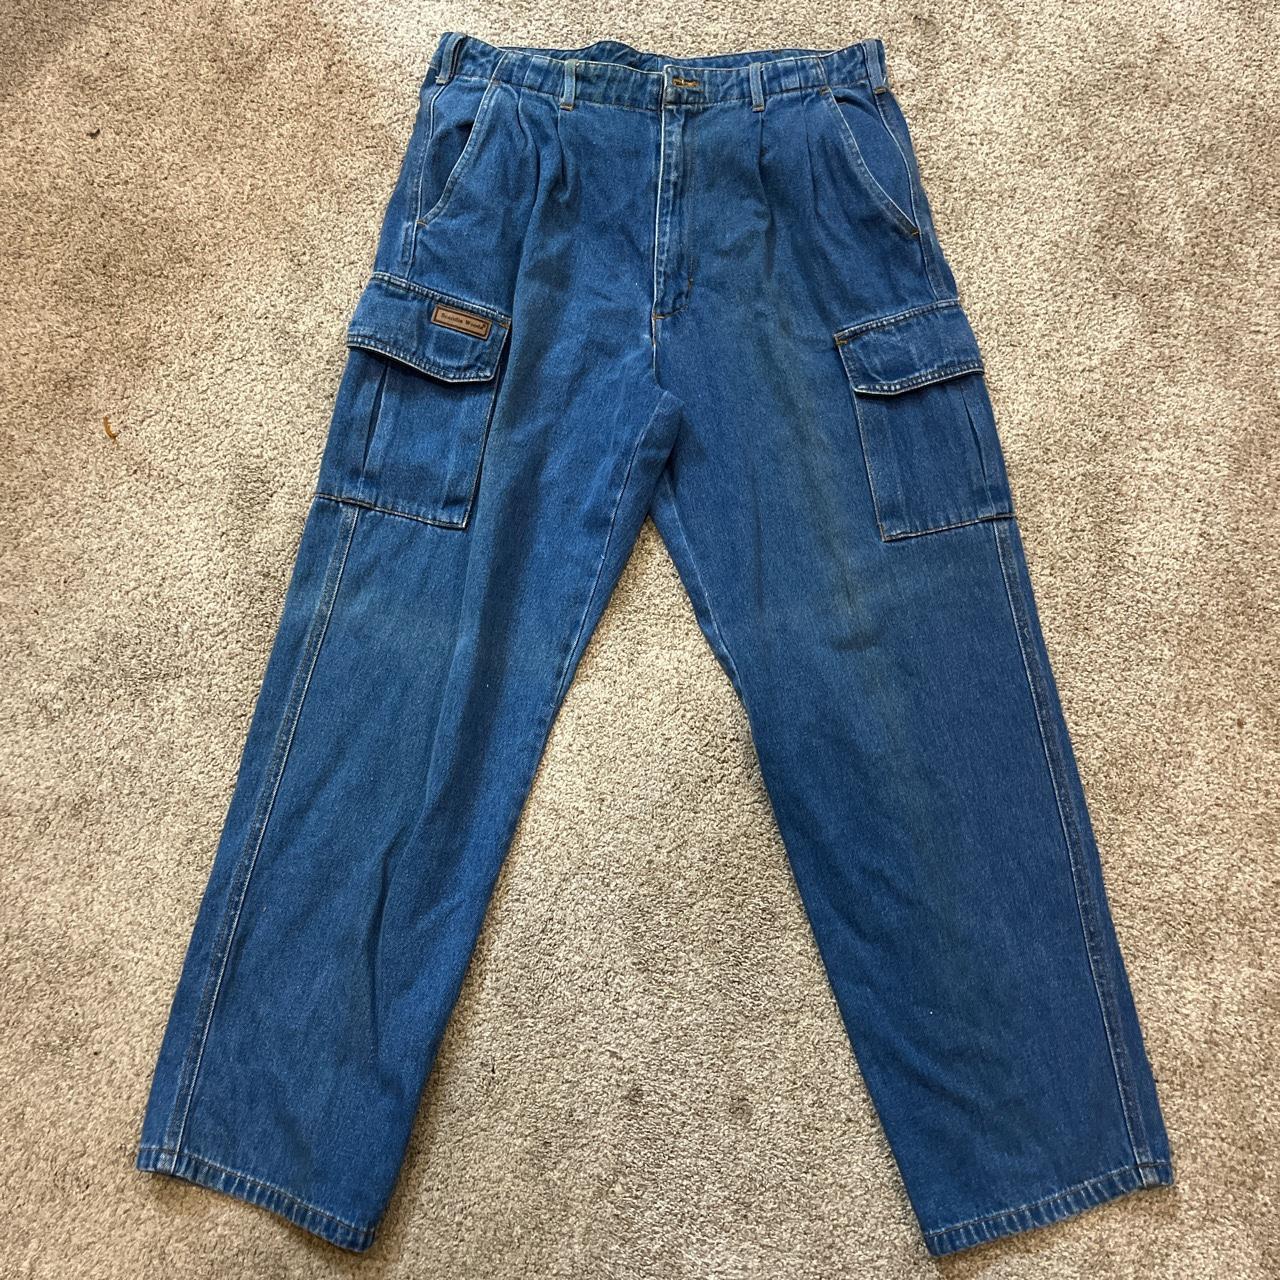 Scandia woods work jeans, made in Indonesia, no... - Depop